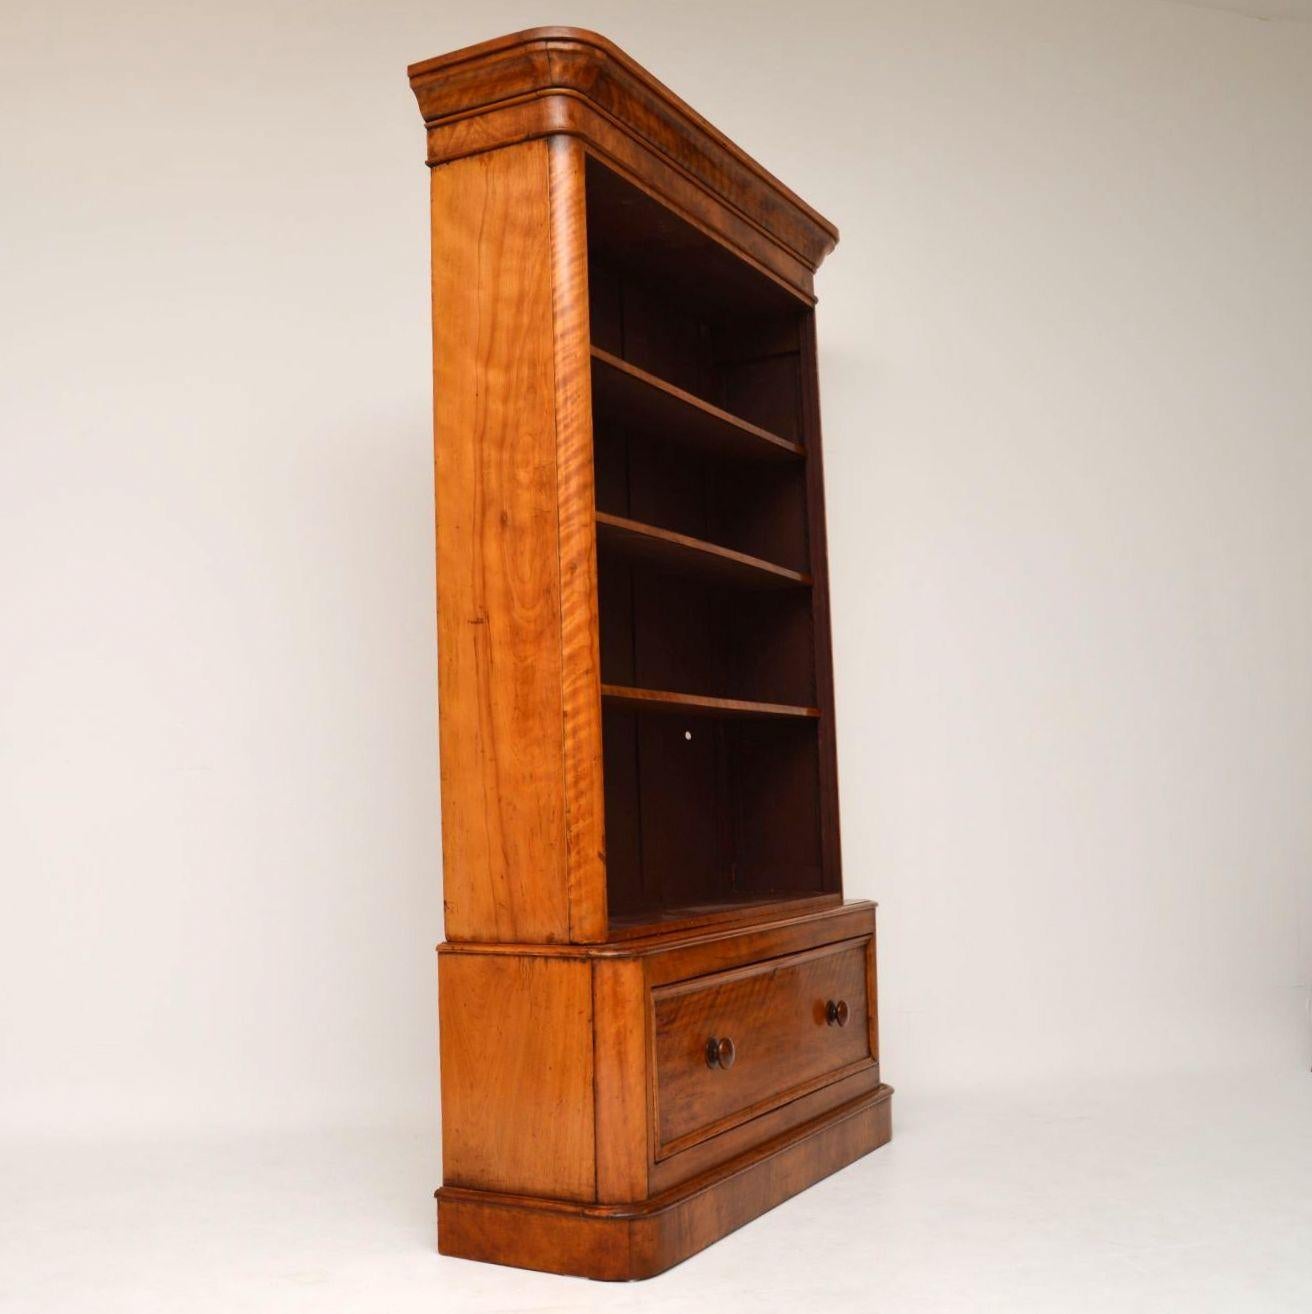 Antique Victorian satinwood open bookcase with adjustable shelves and sitting on a single drawer base section. It’s in very good condition and dates from circa 1860s-1880s period. The corners are curved all the way down from the very pronounced